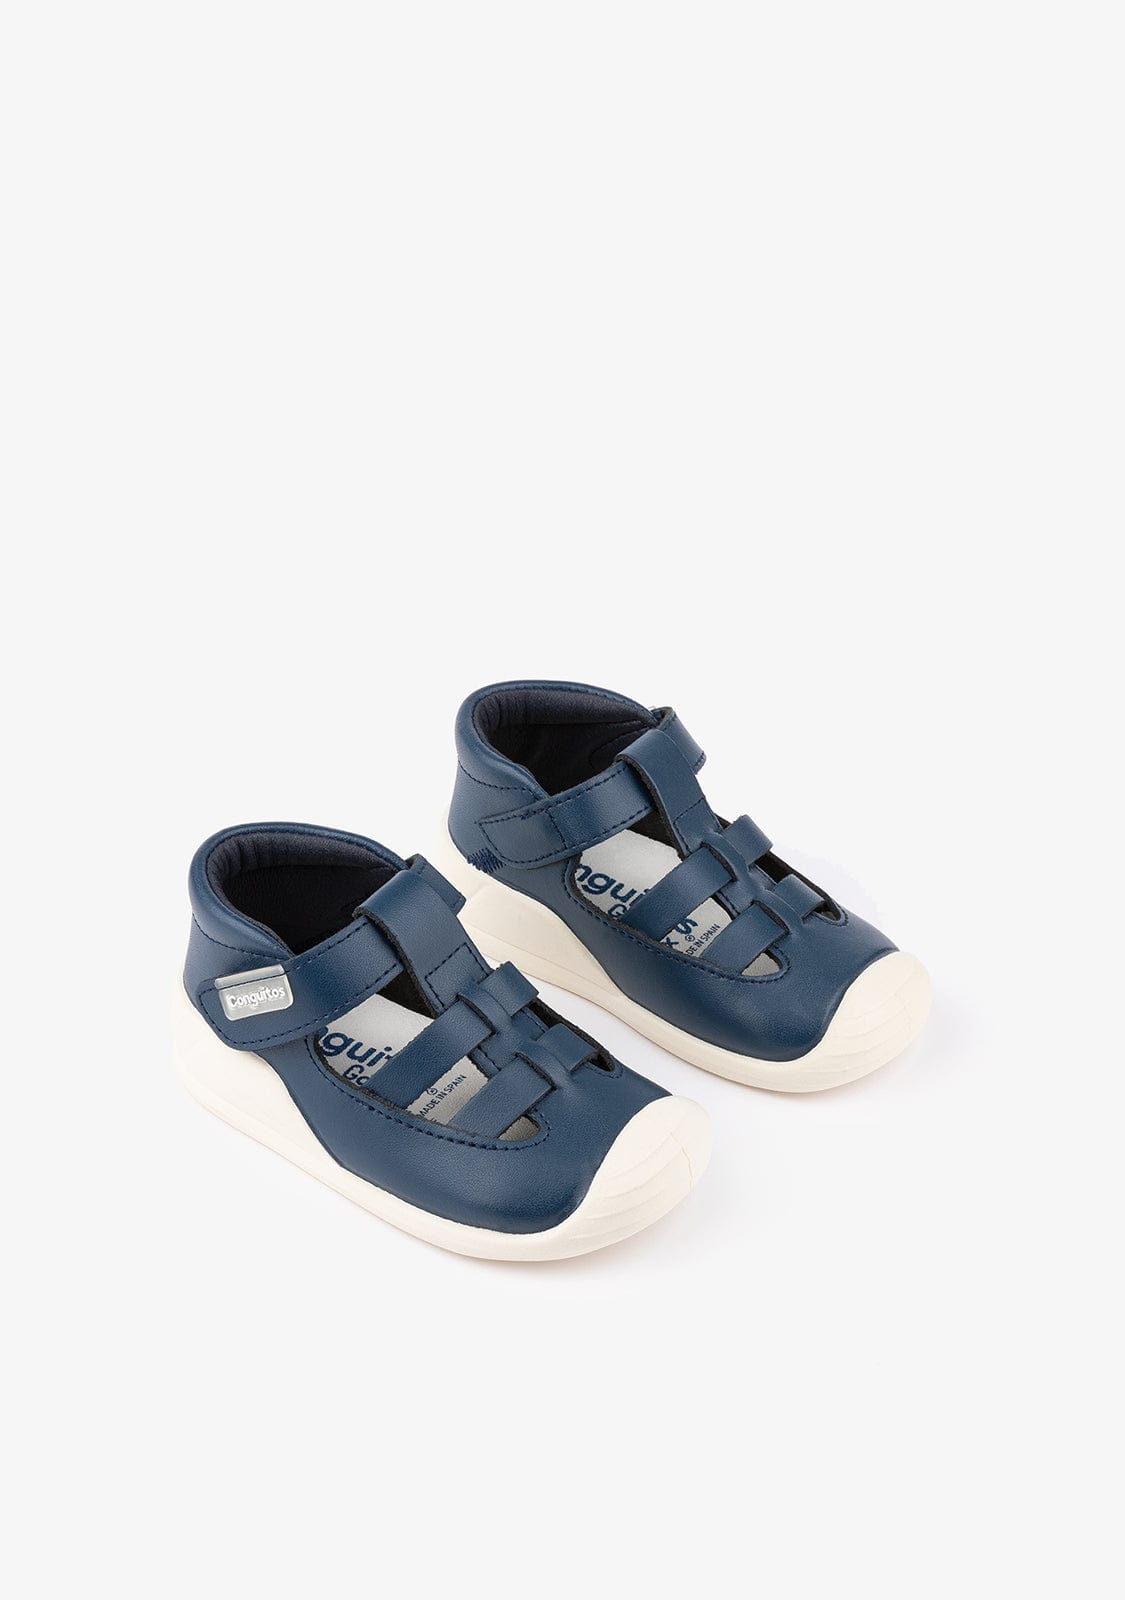 CONGUITOS Shoes Baby's Navy First Steps Sandals